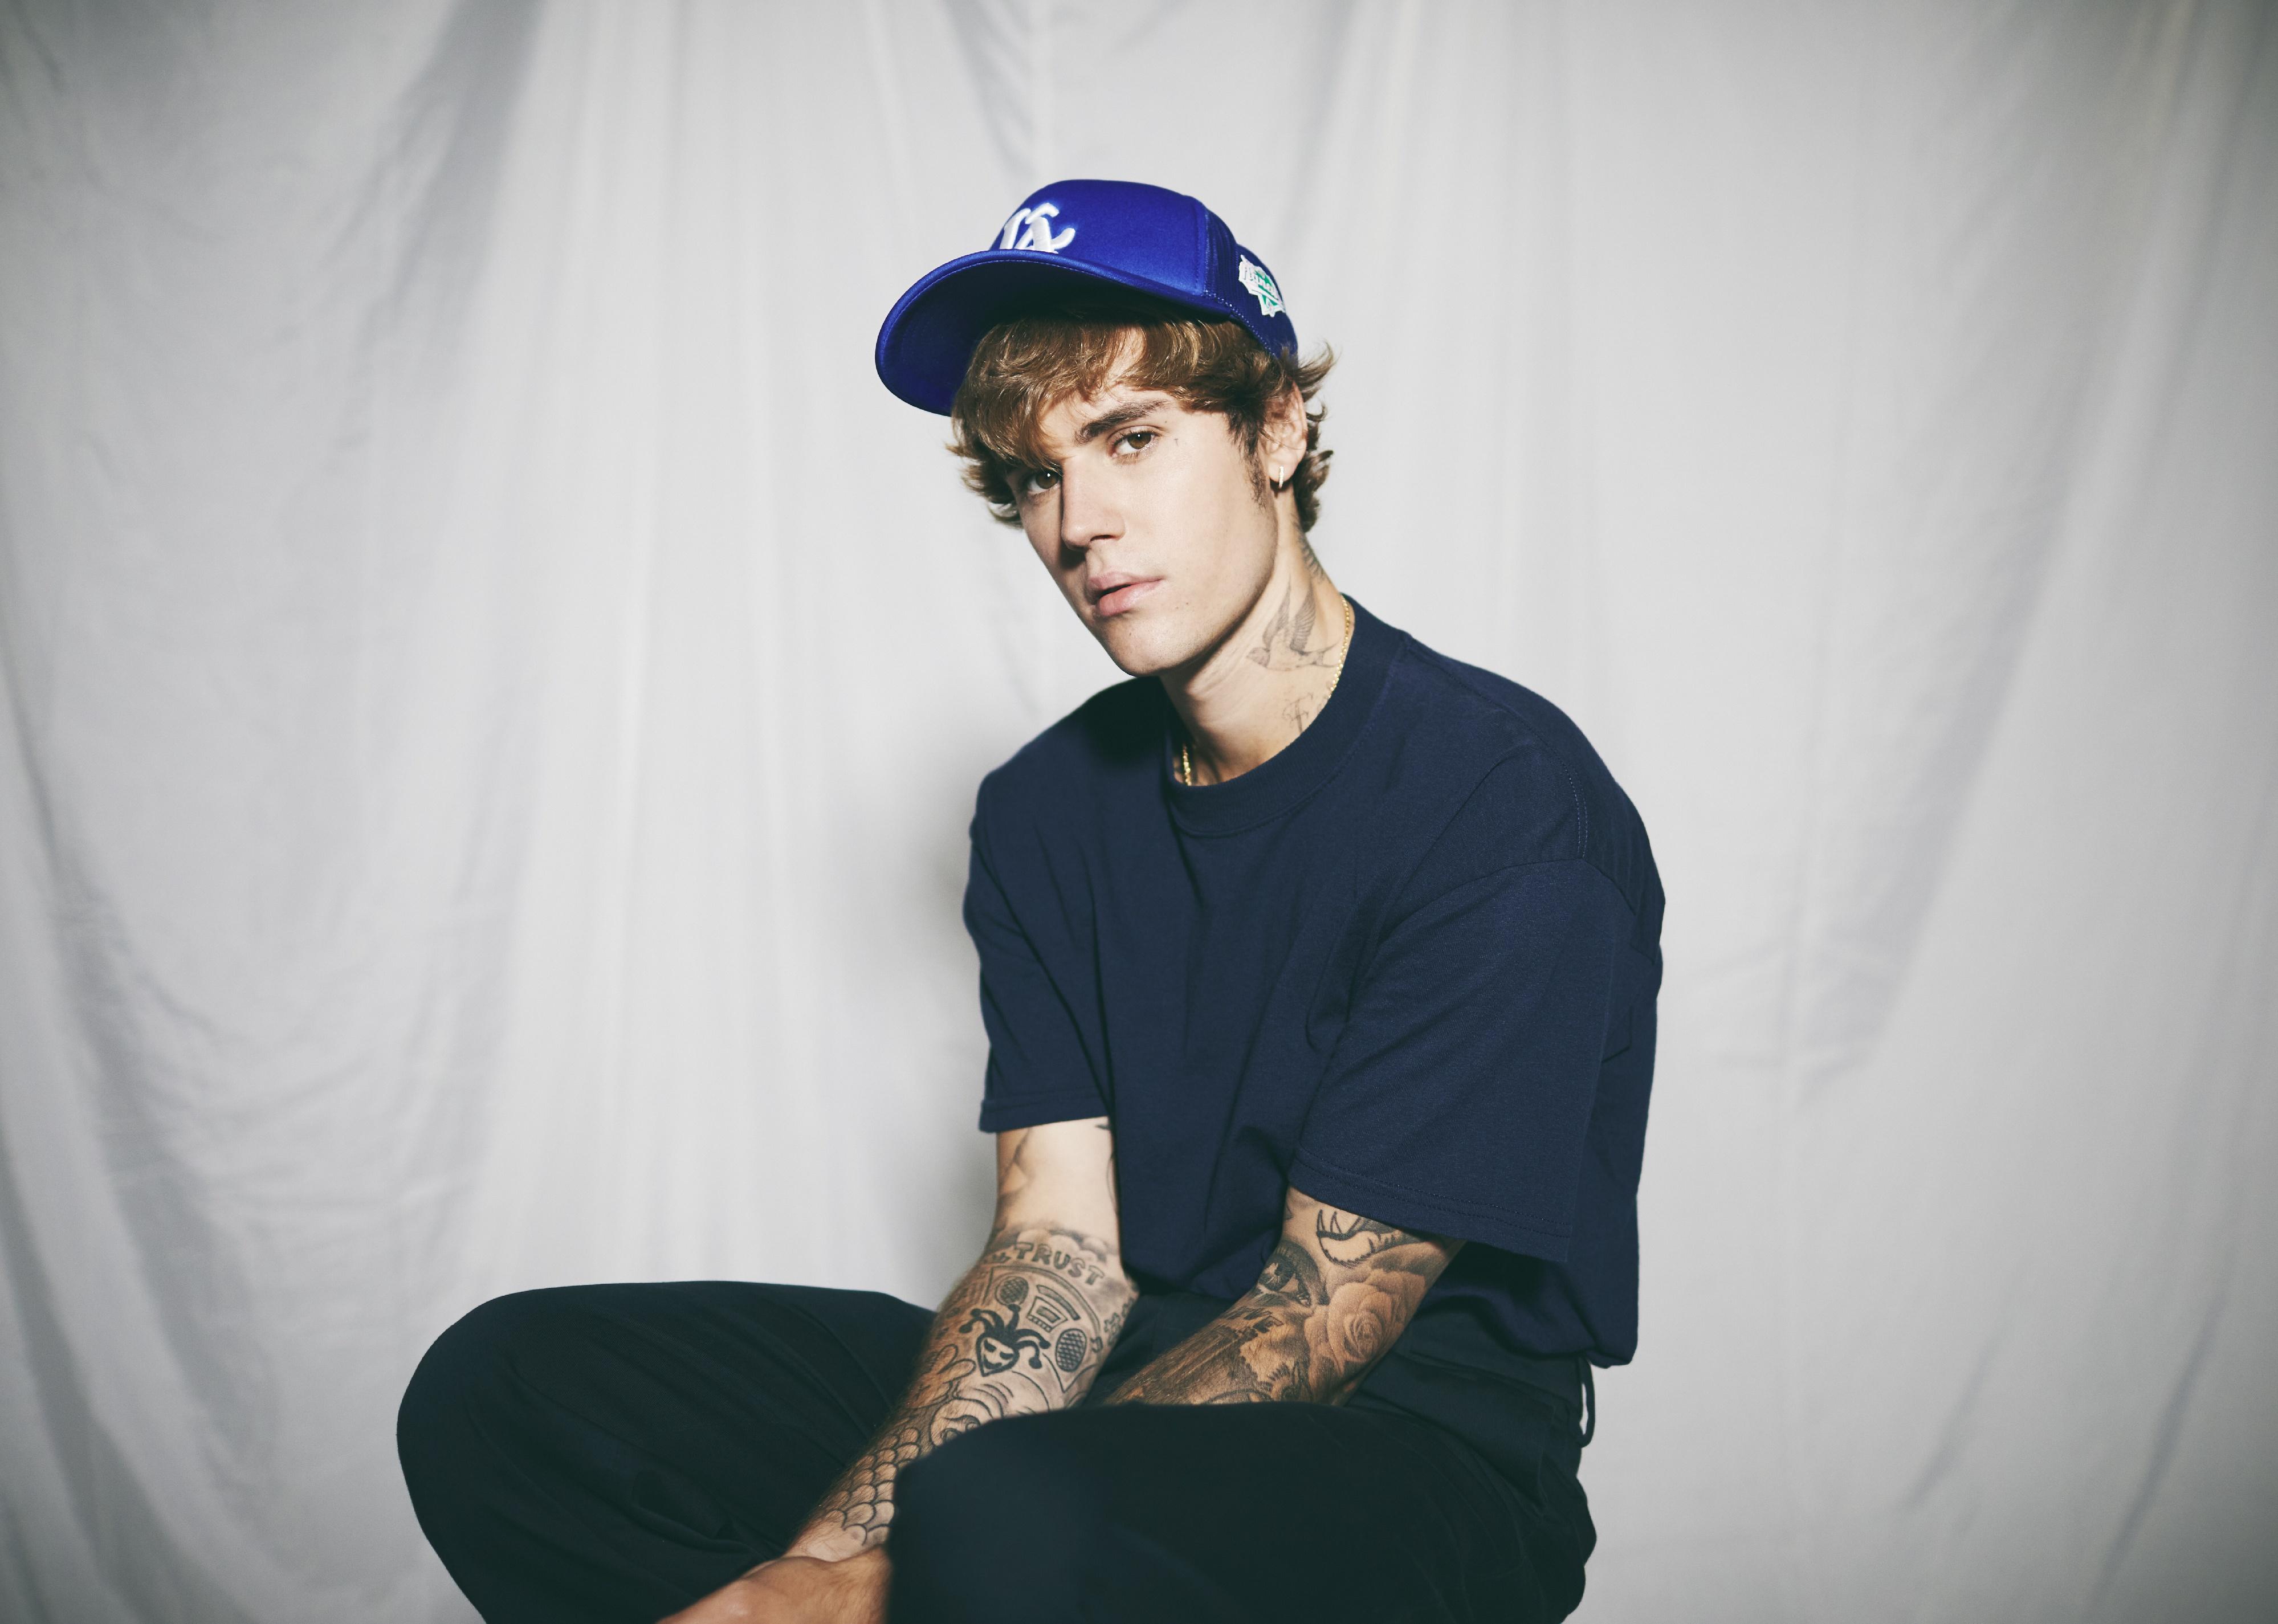 Justin Bieber sitting in a studio wearing a blue baseball cap, blue t-shirt and pants.